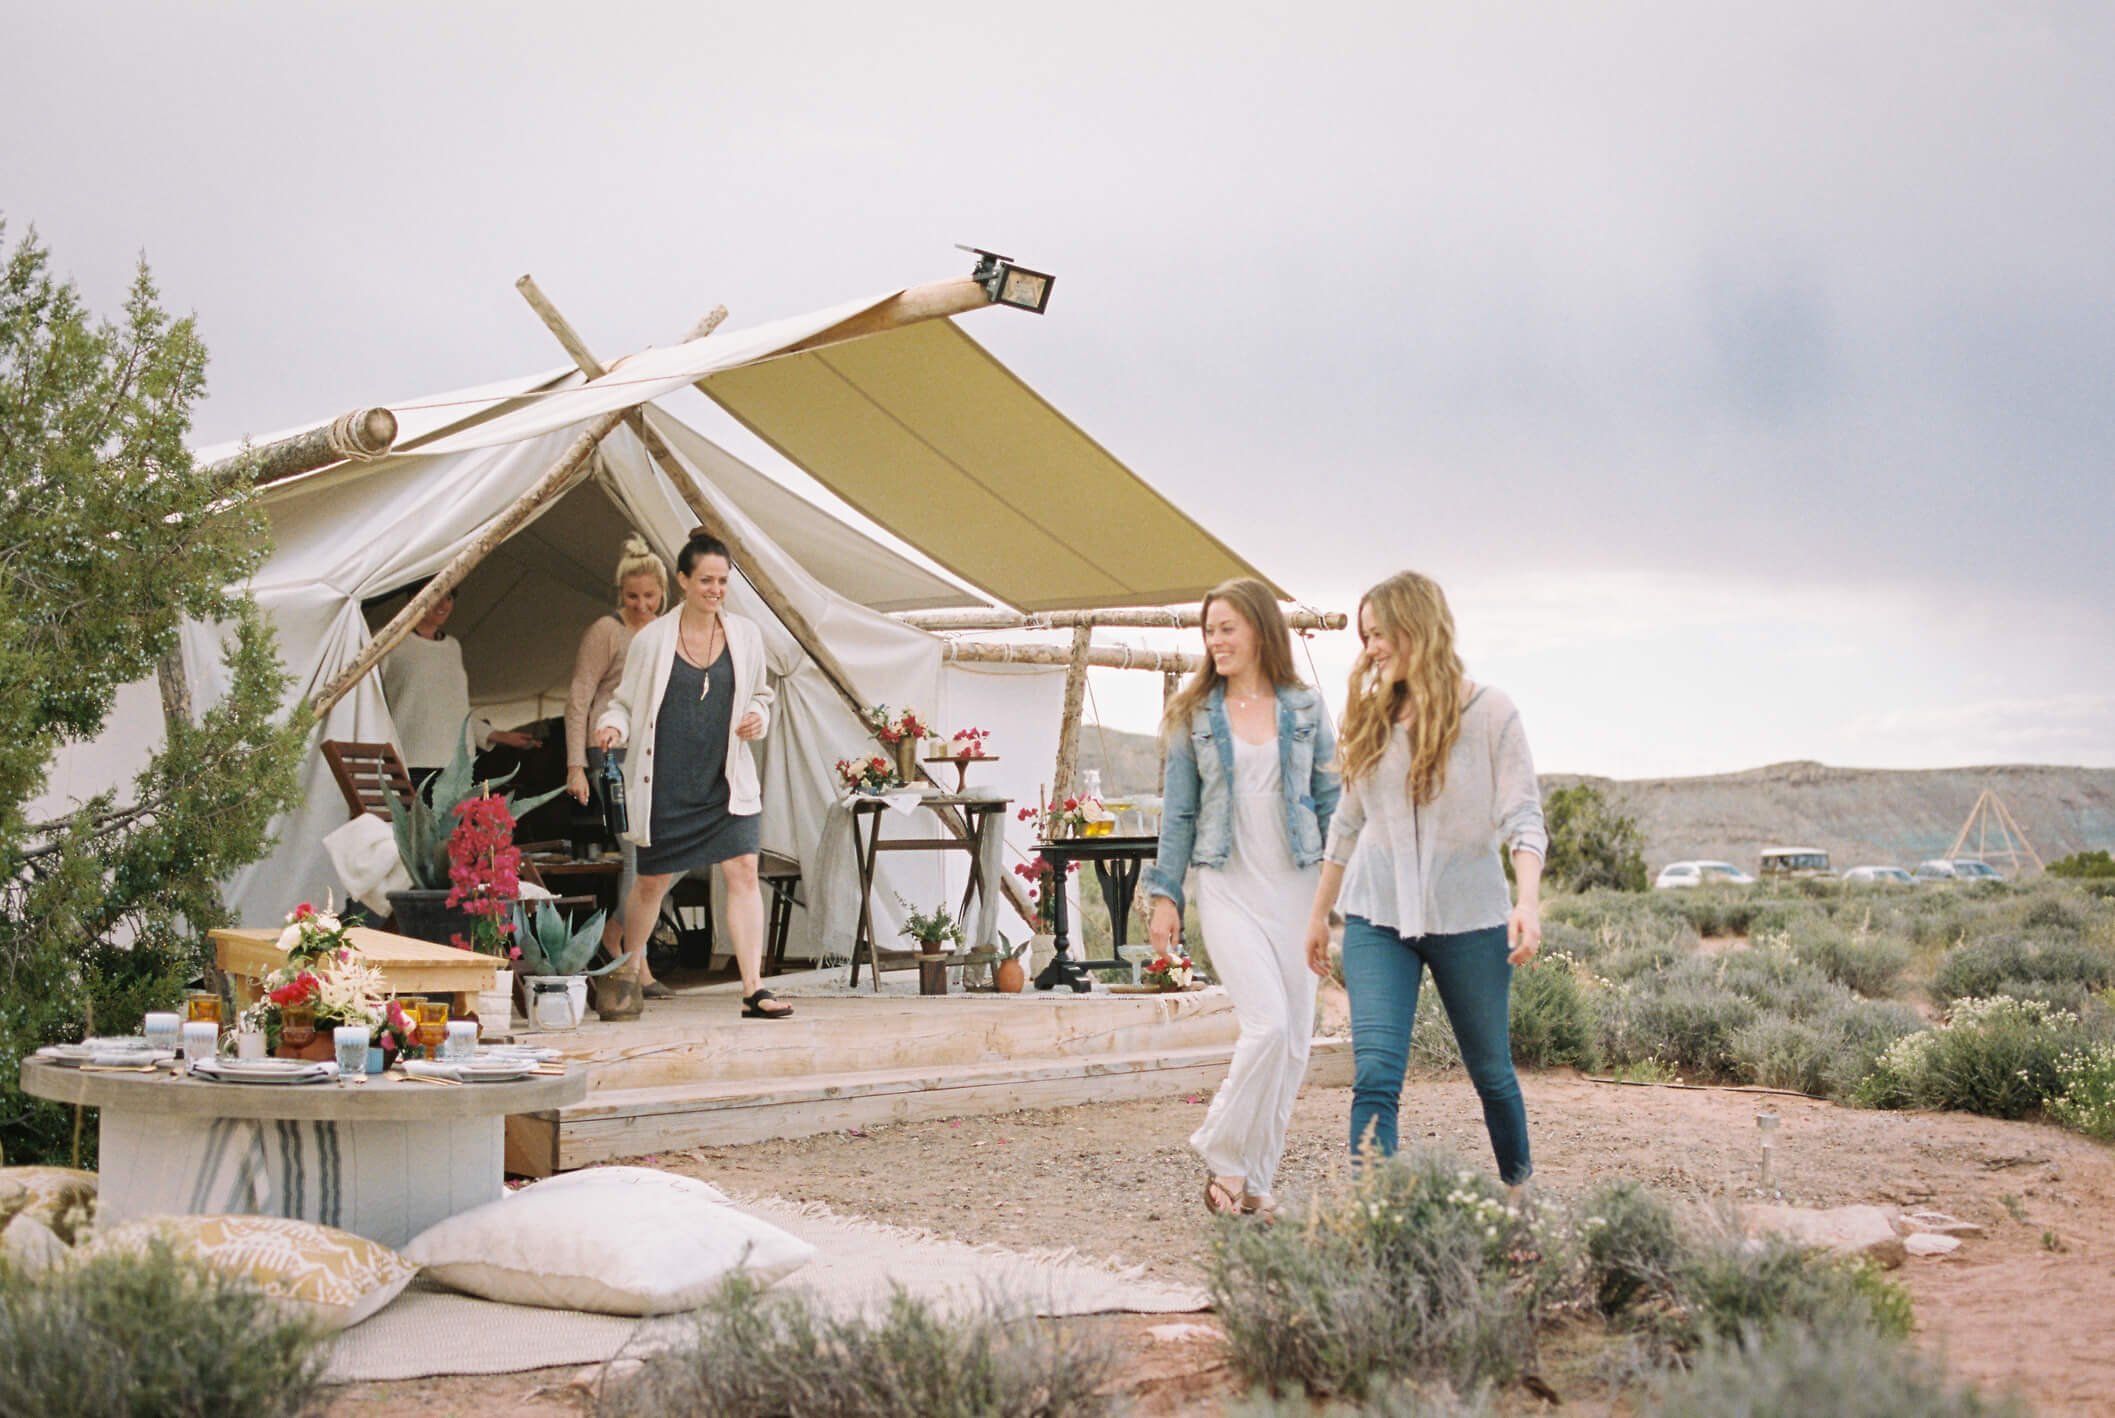 Glamping NSW - We Review The 11 Best Options | WHO Magazine